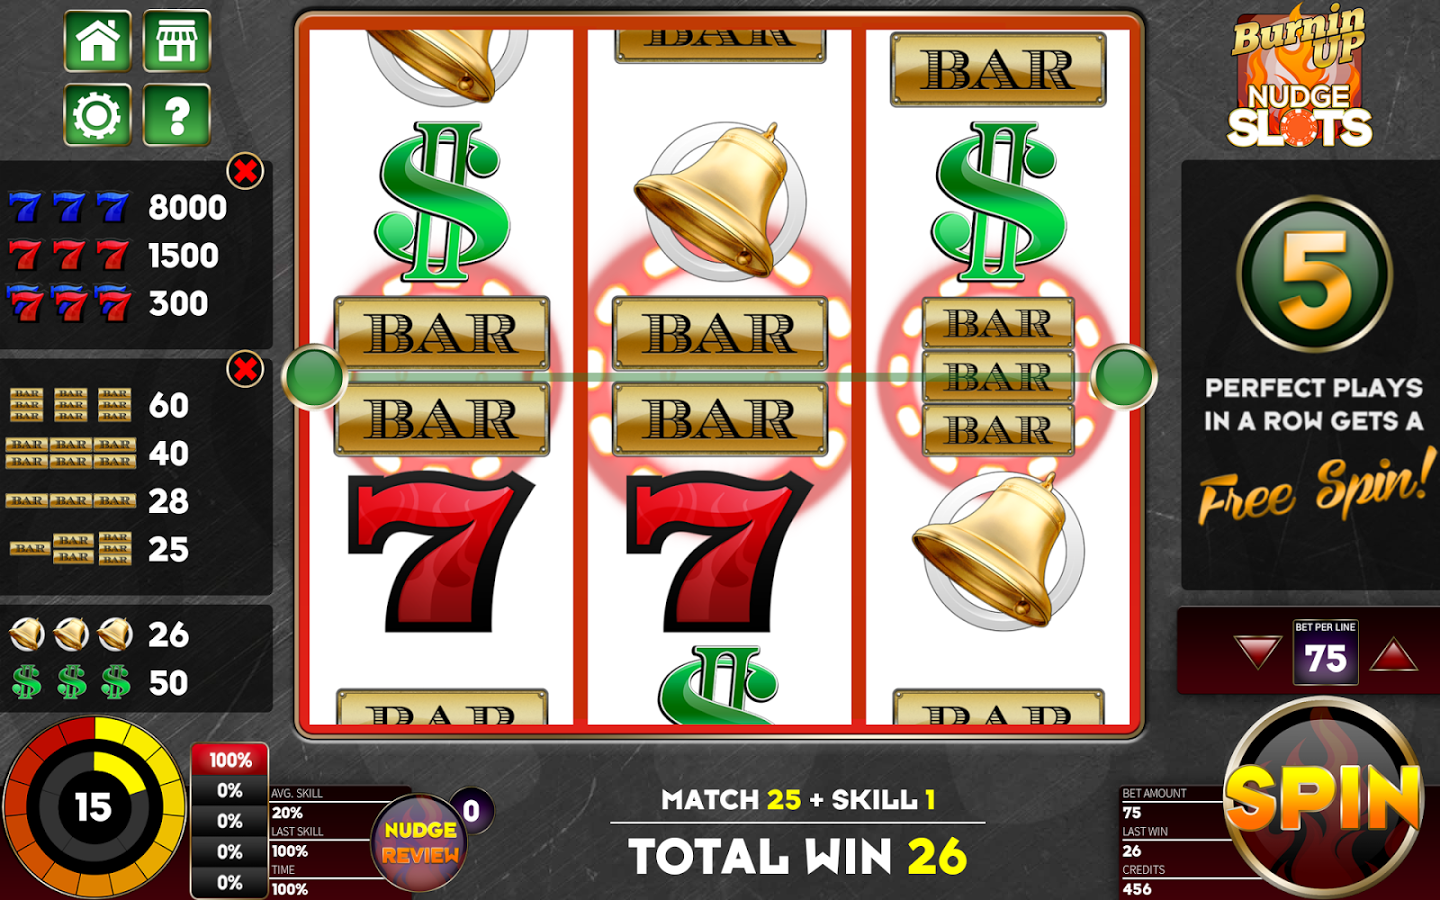 Developed Slot Machine App for Android Phones/Tablets - Appdev360